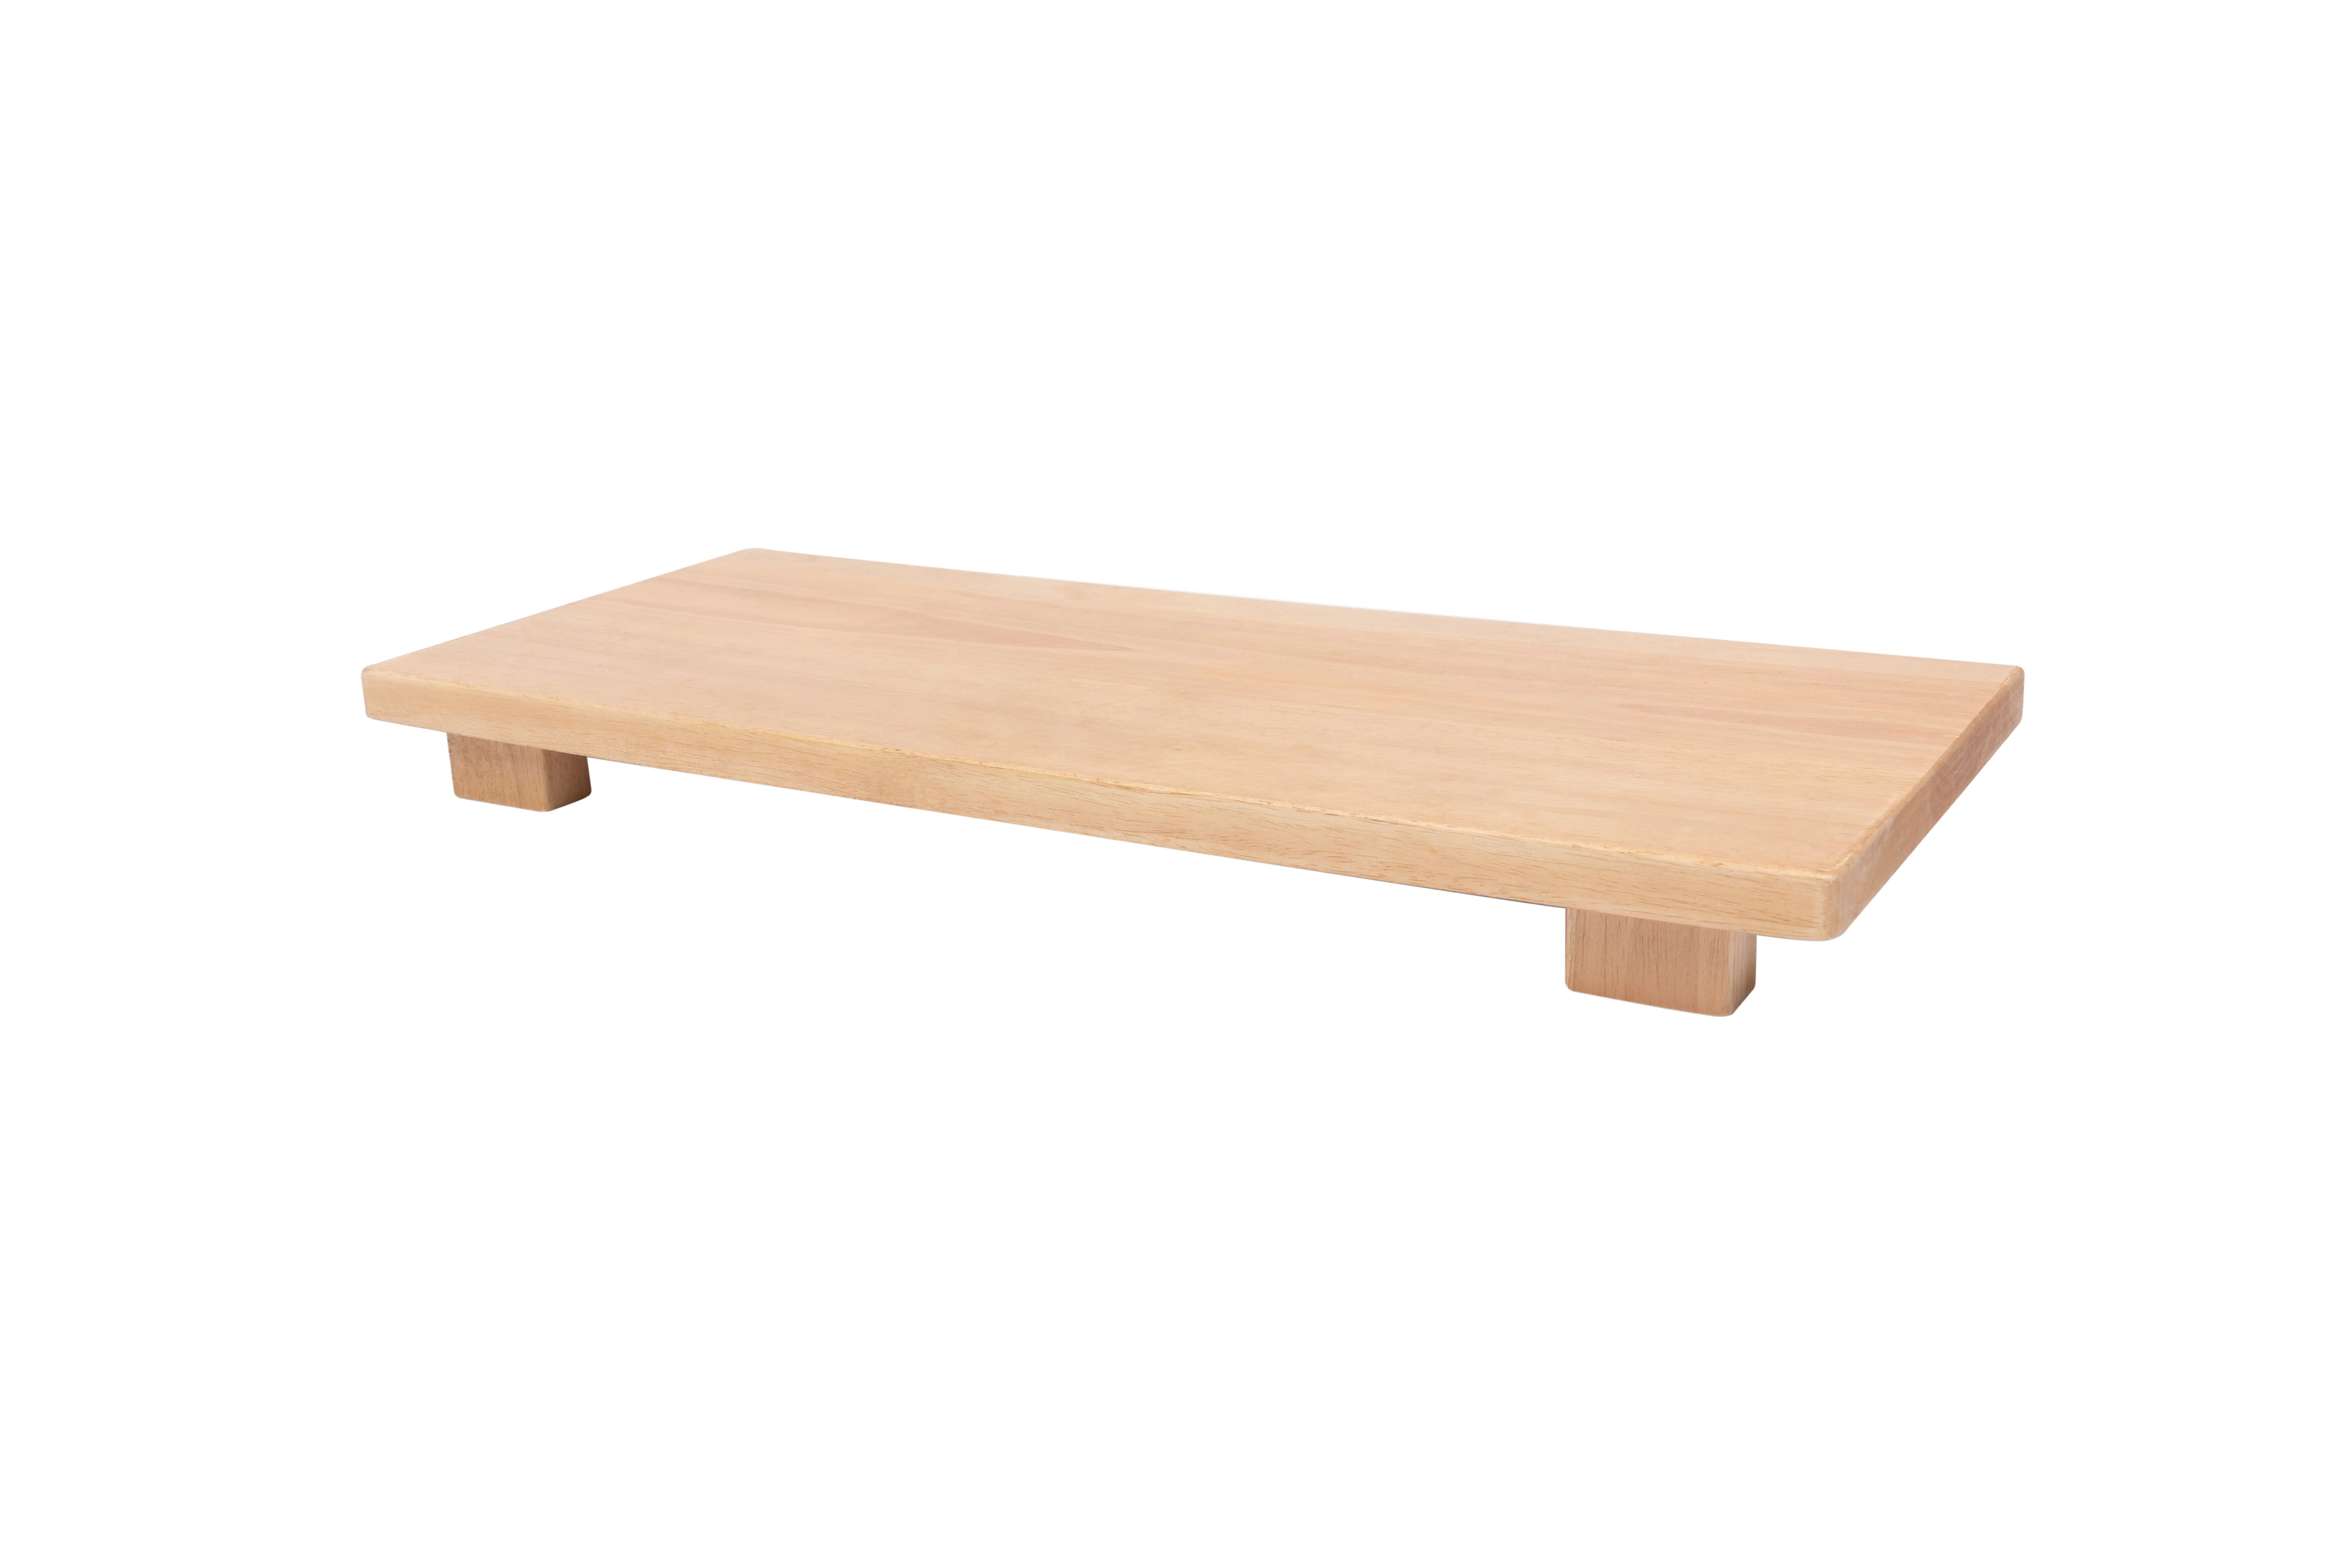 Better Homes & Gardens Rubber Wood Serve Footed Board | Walmart (US)